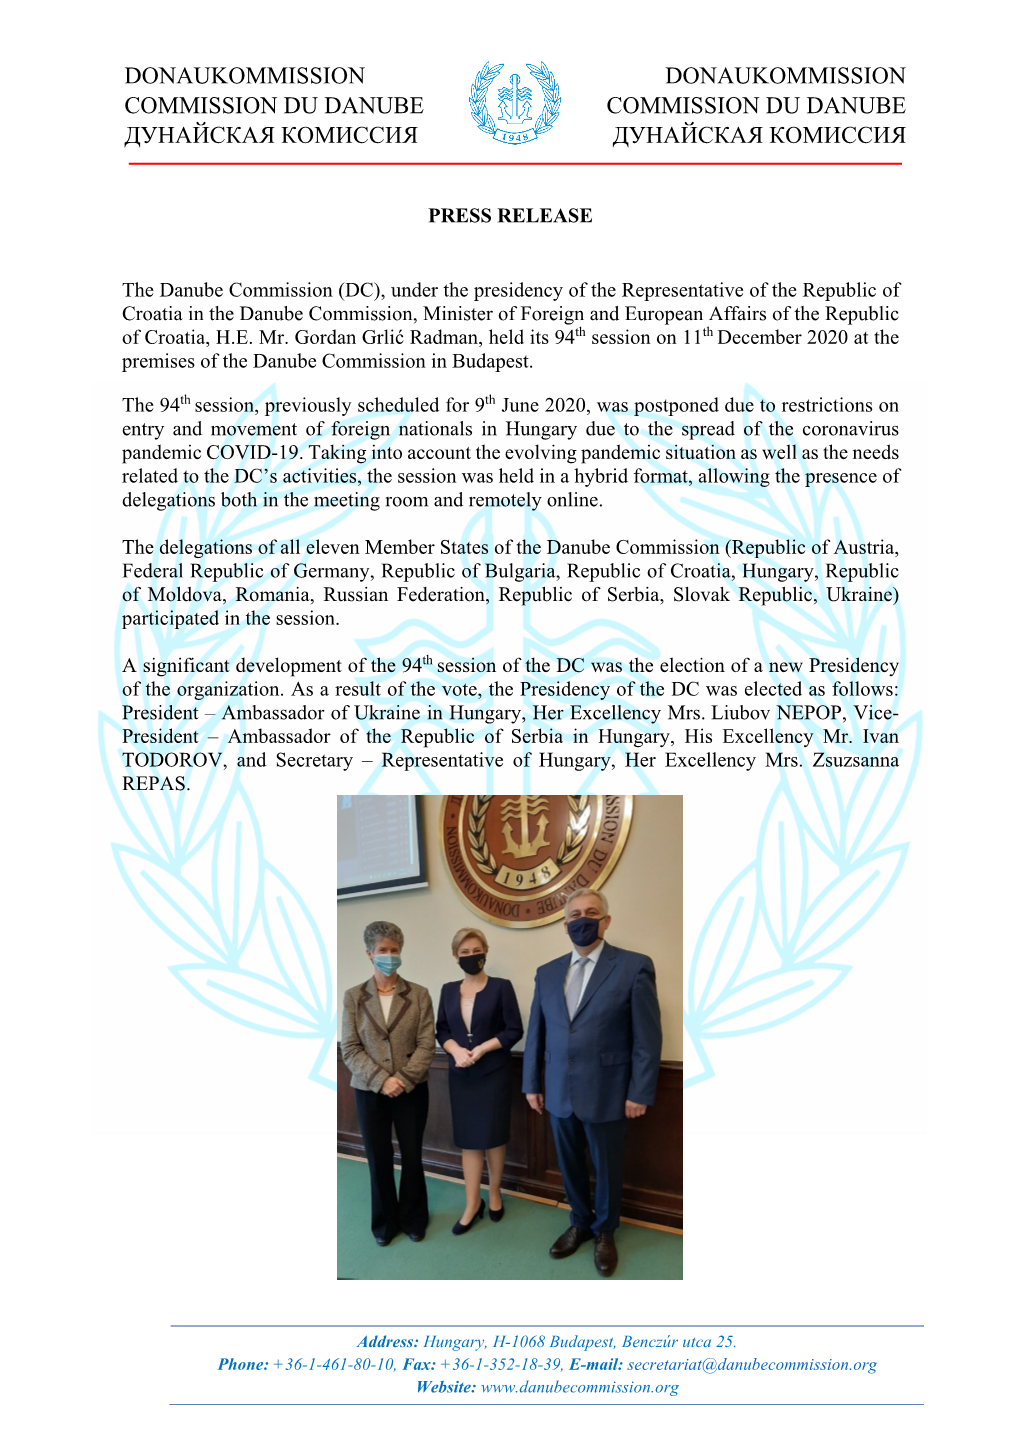 Press Release of the Danube Commission